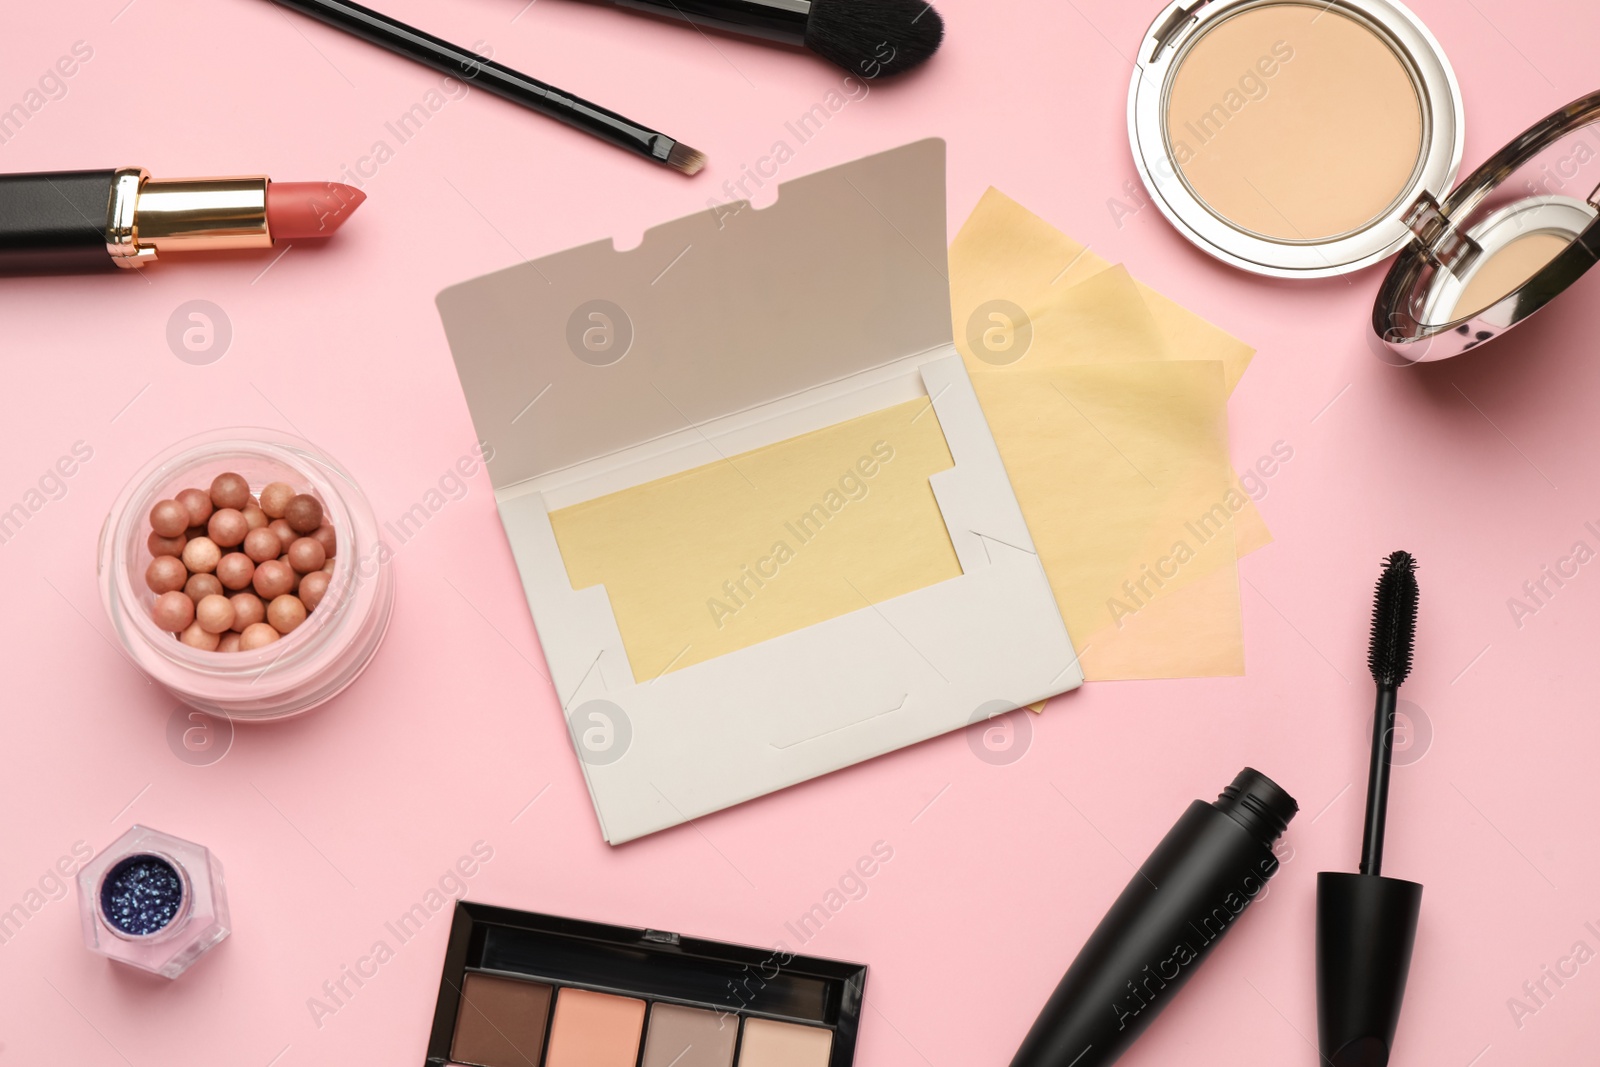 Photo of Facial oil blotting tissues and different decorative cosmetics on pink background, flat lay. Mattifying wipes